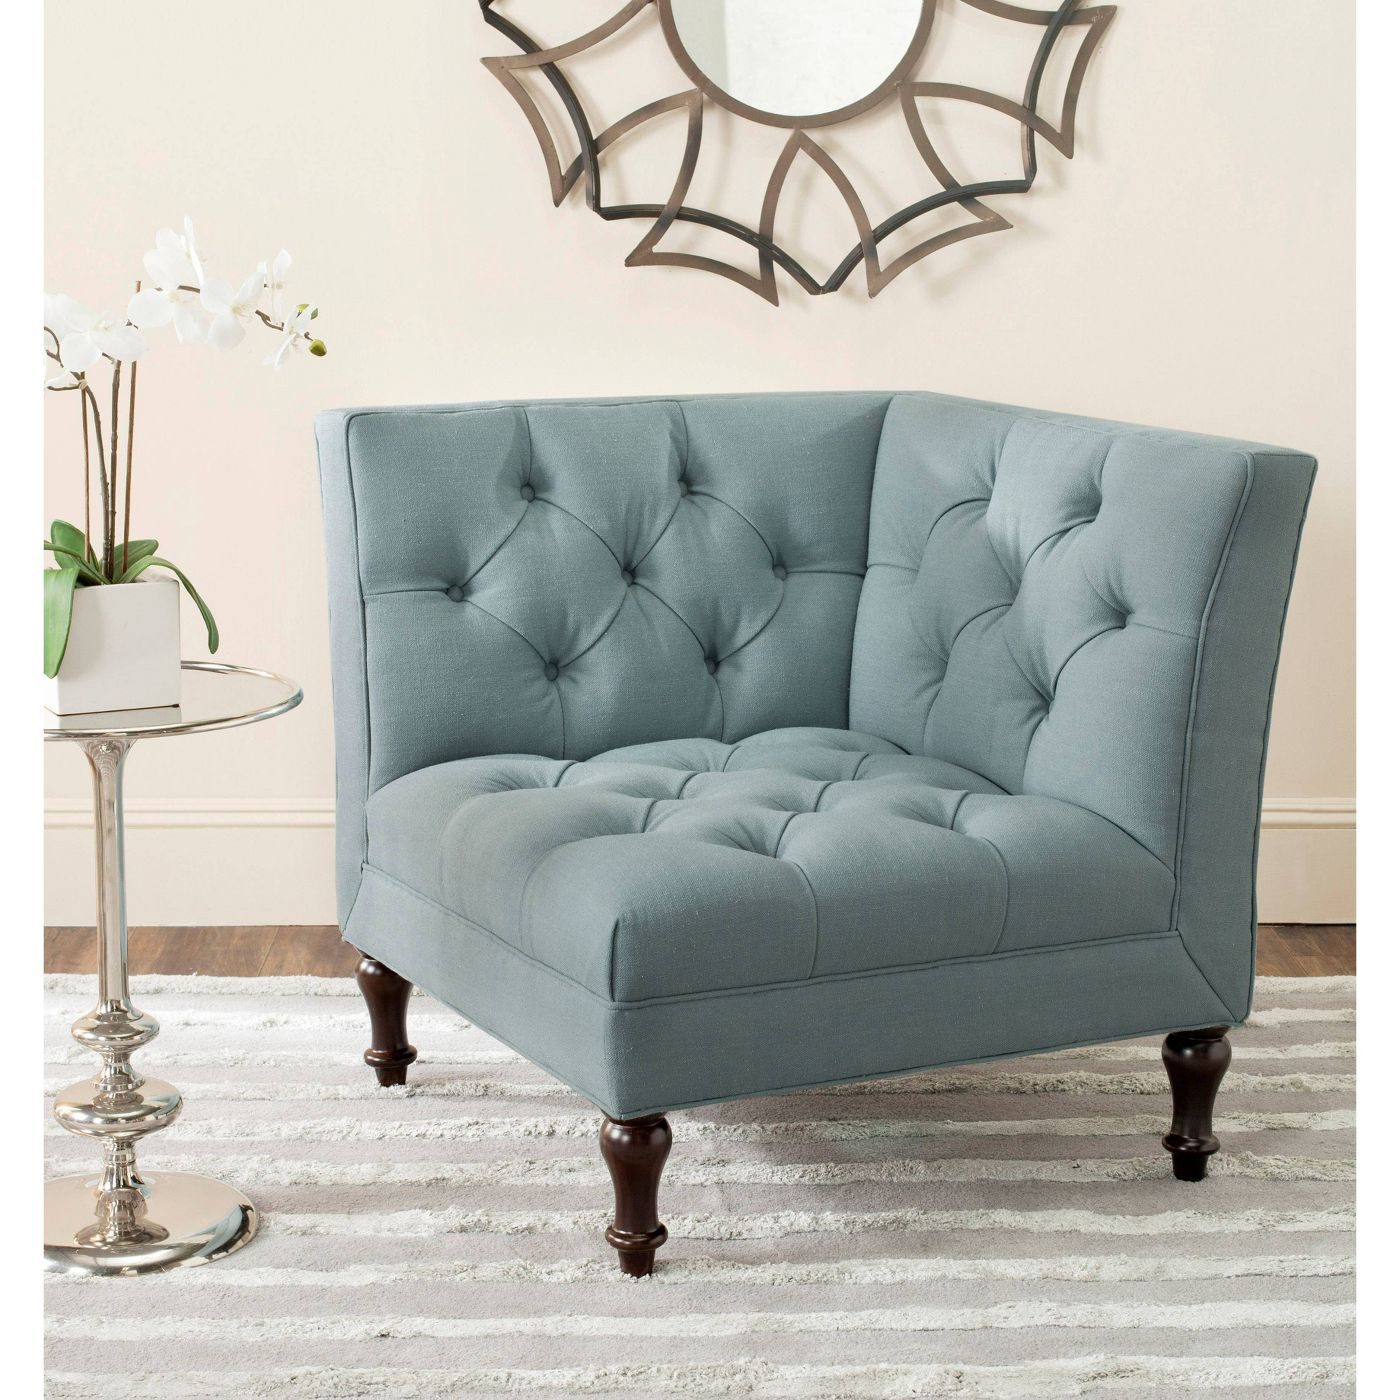 This piece of farmhouse furniture is a light blue, tufted accent chair.